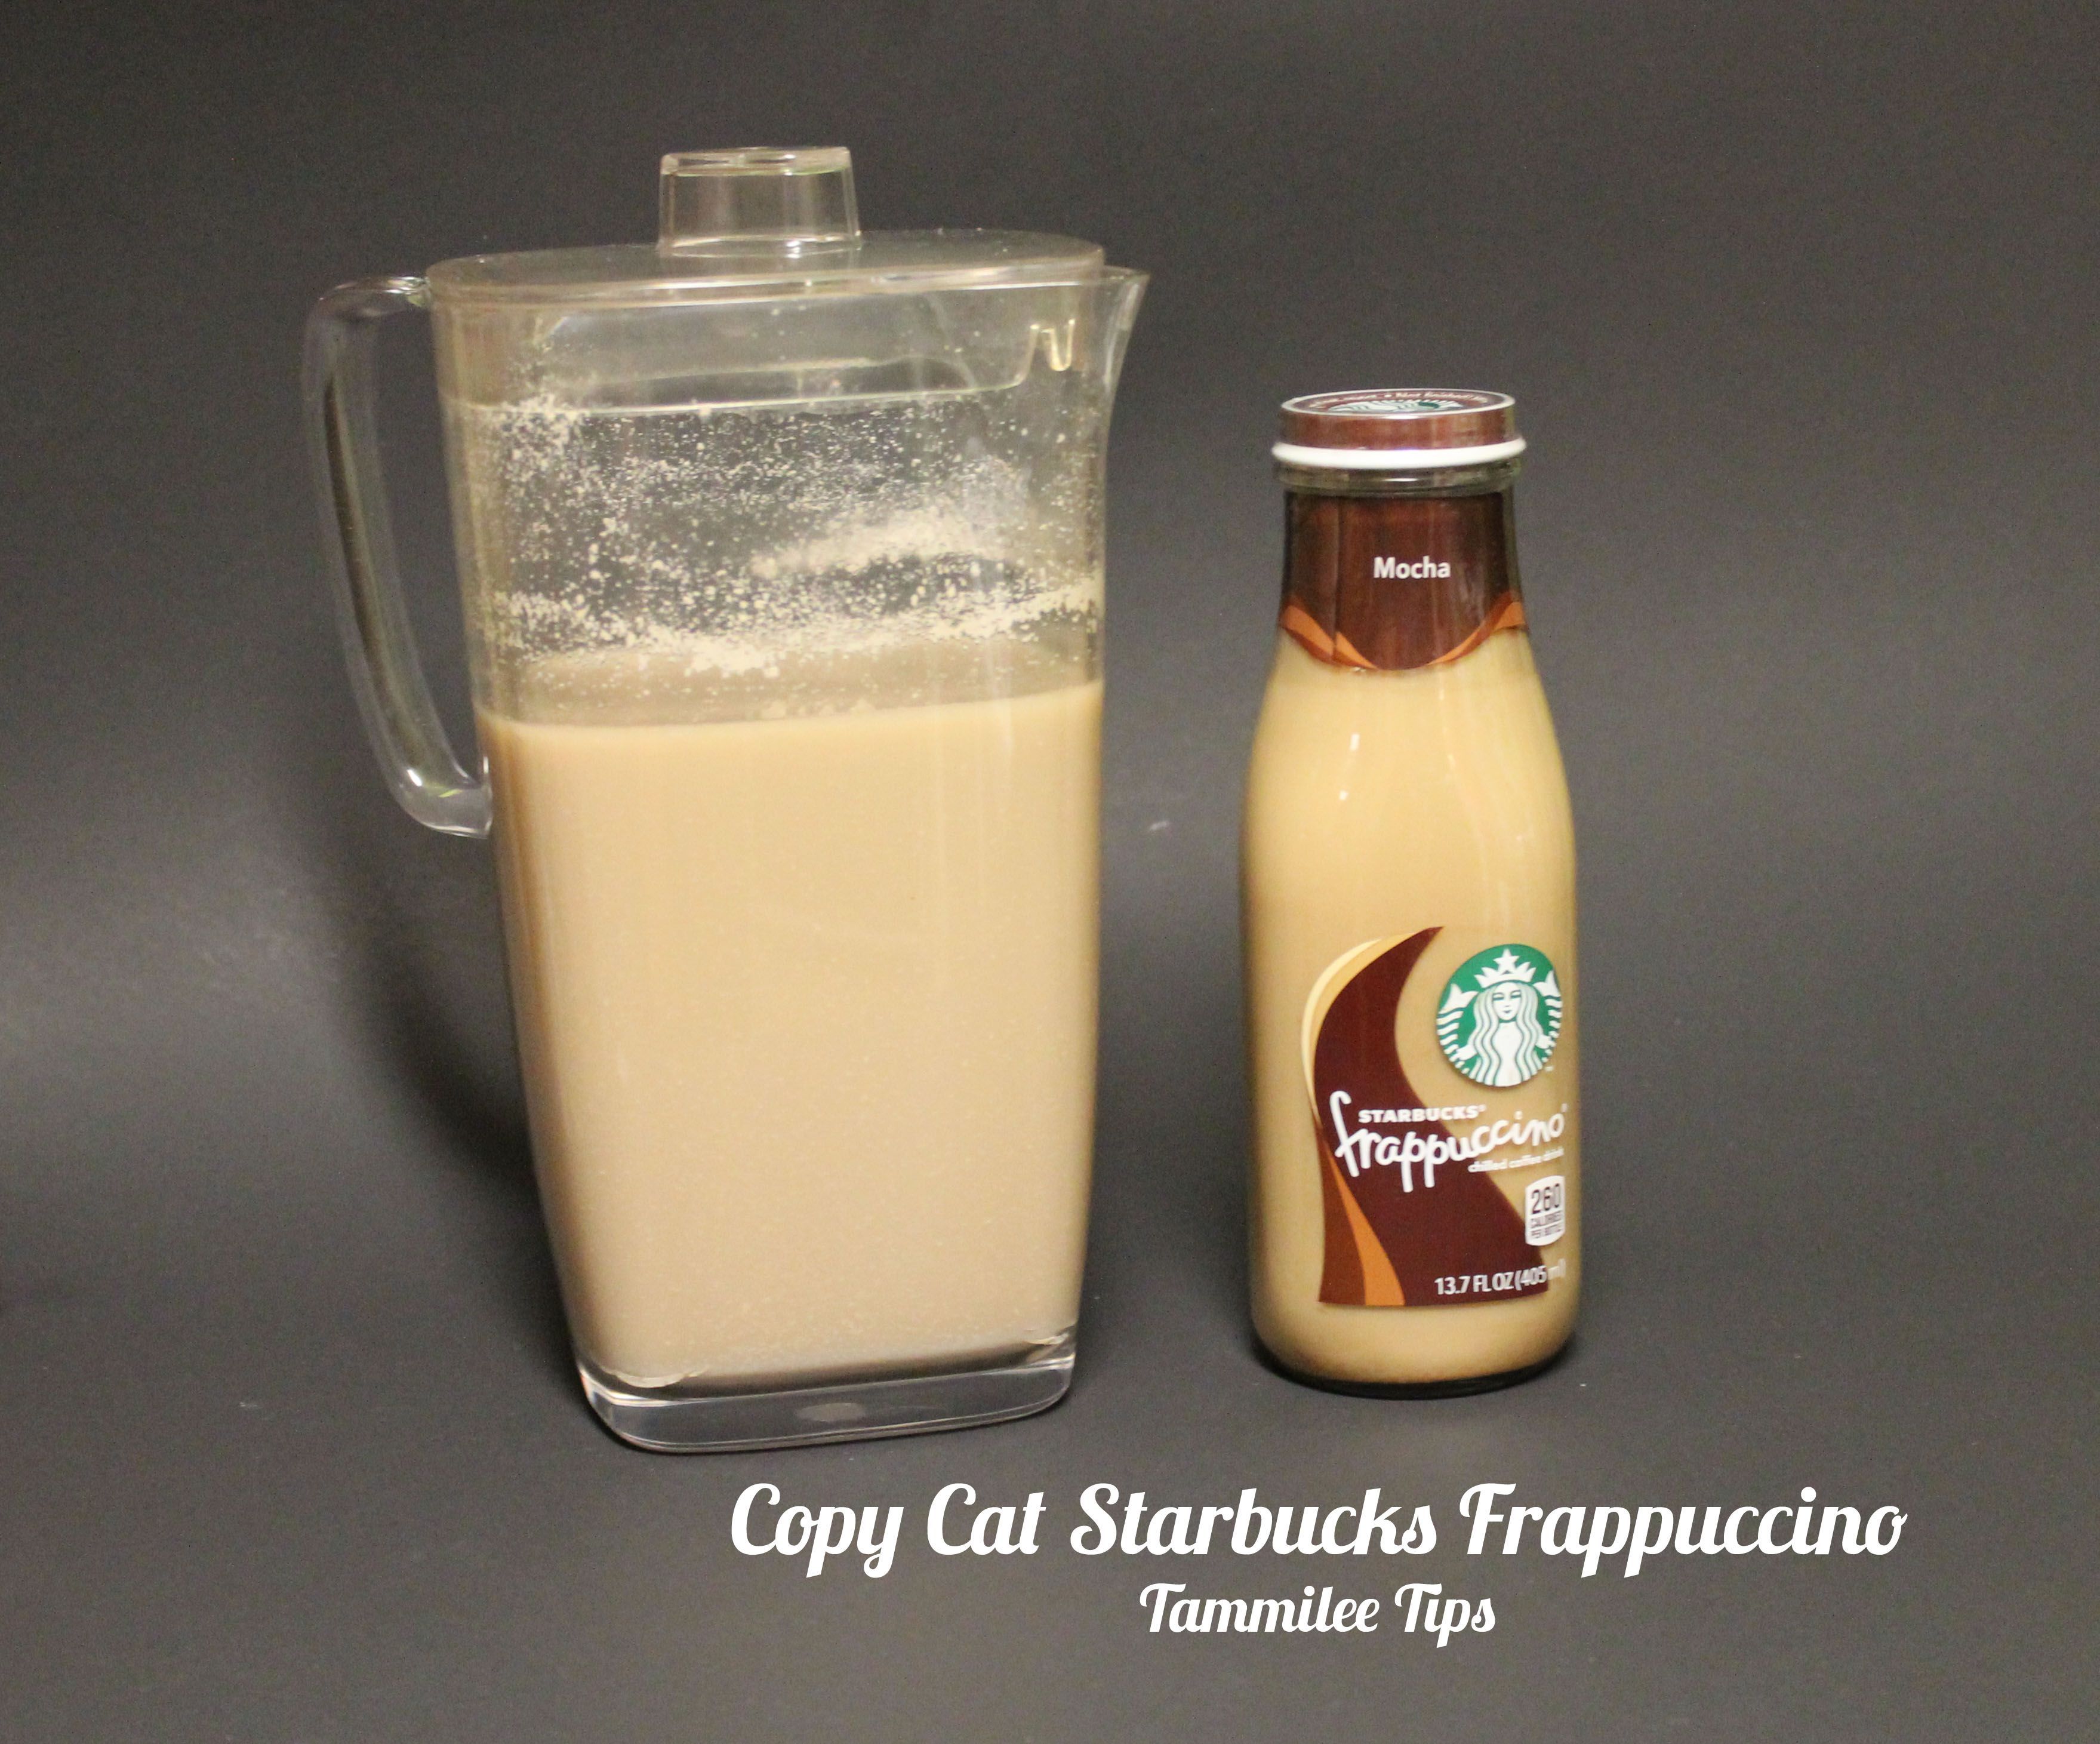 making right now!!! Copy Cat Starbucks Frappuccino. Ingredients: 10 cups cold coffee, 1/2 cup sugar, 1/2 cup brown sugar, 1/2 cup